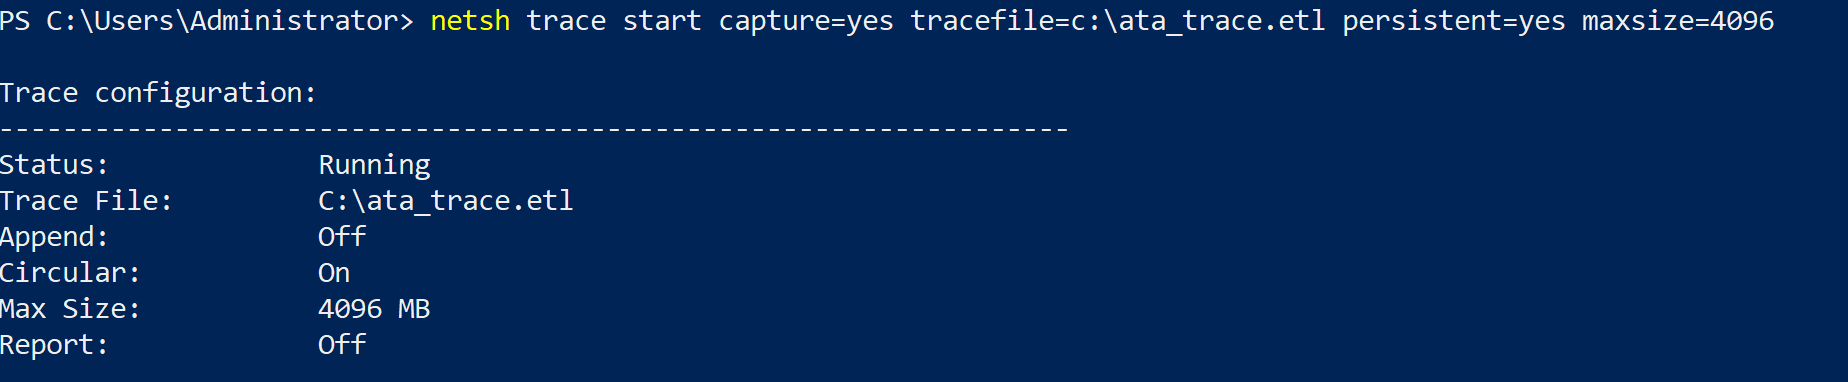 Fetching the Traces of the Network to Store in a File